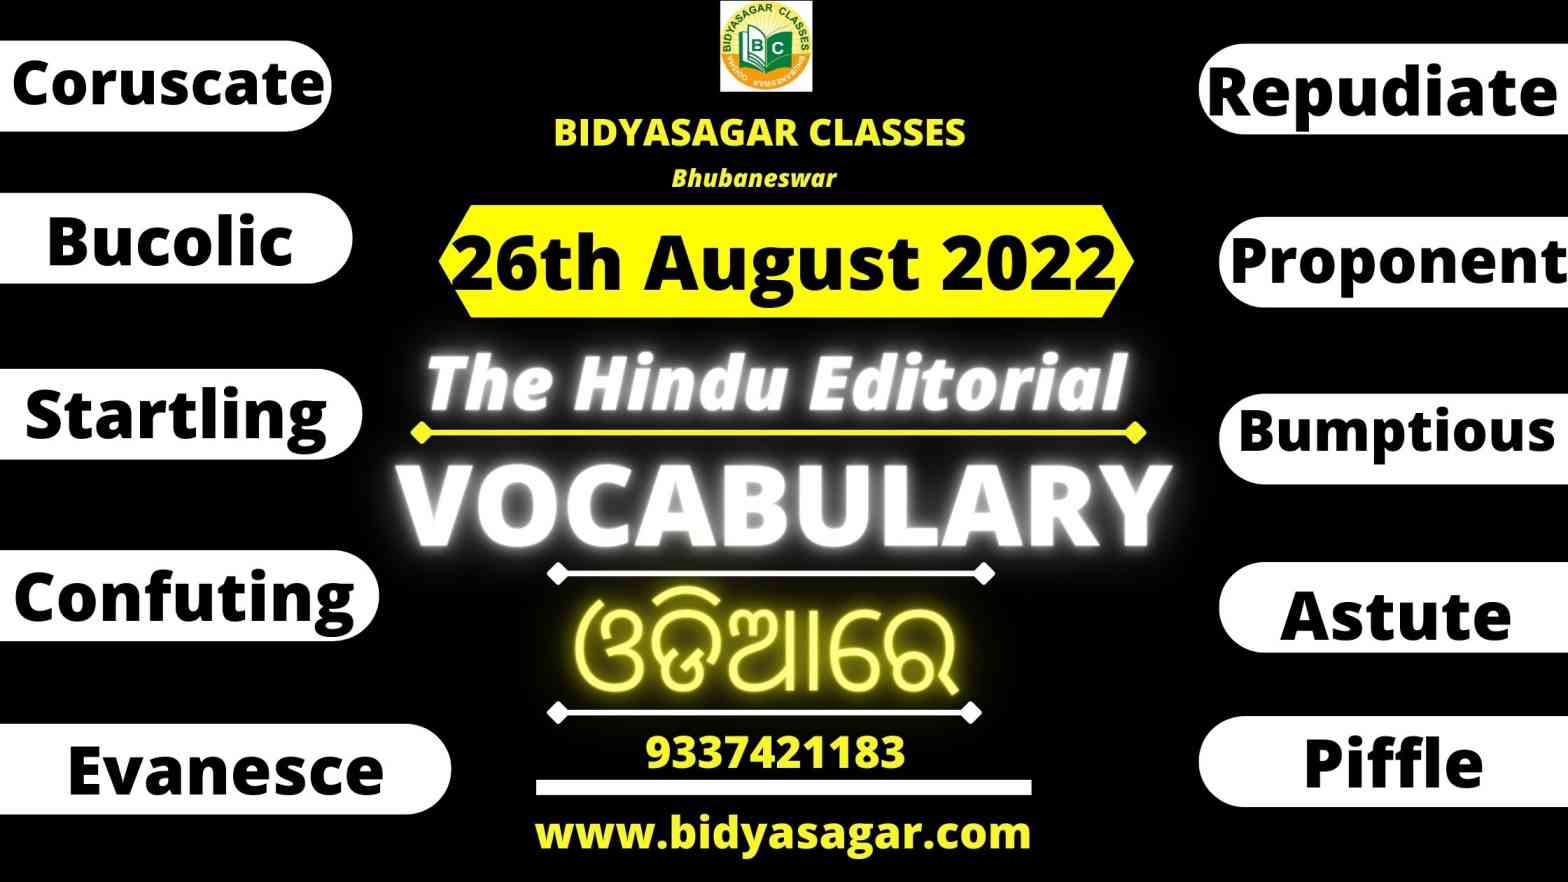 The Hindu Editorial Vocabulary of 26th August 2022